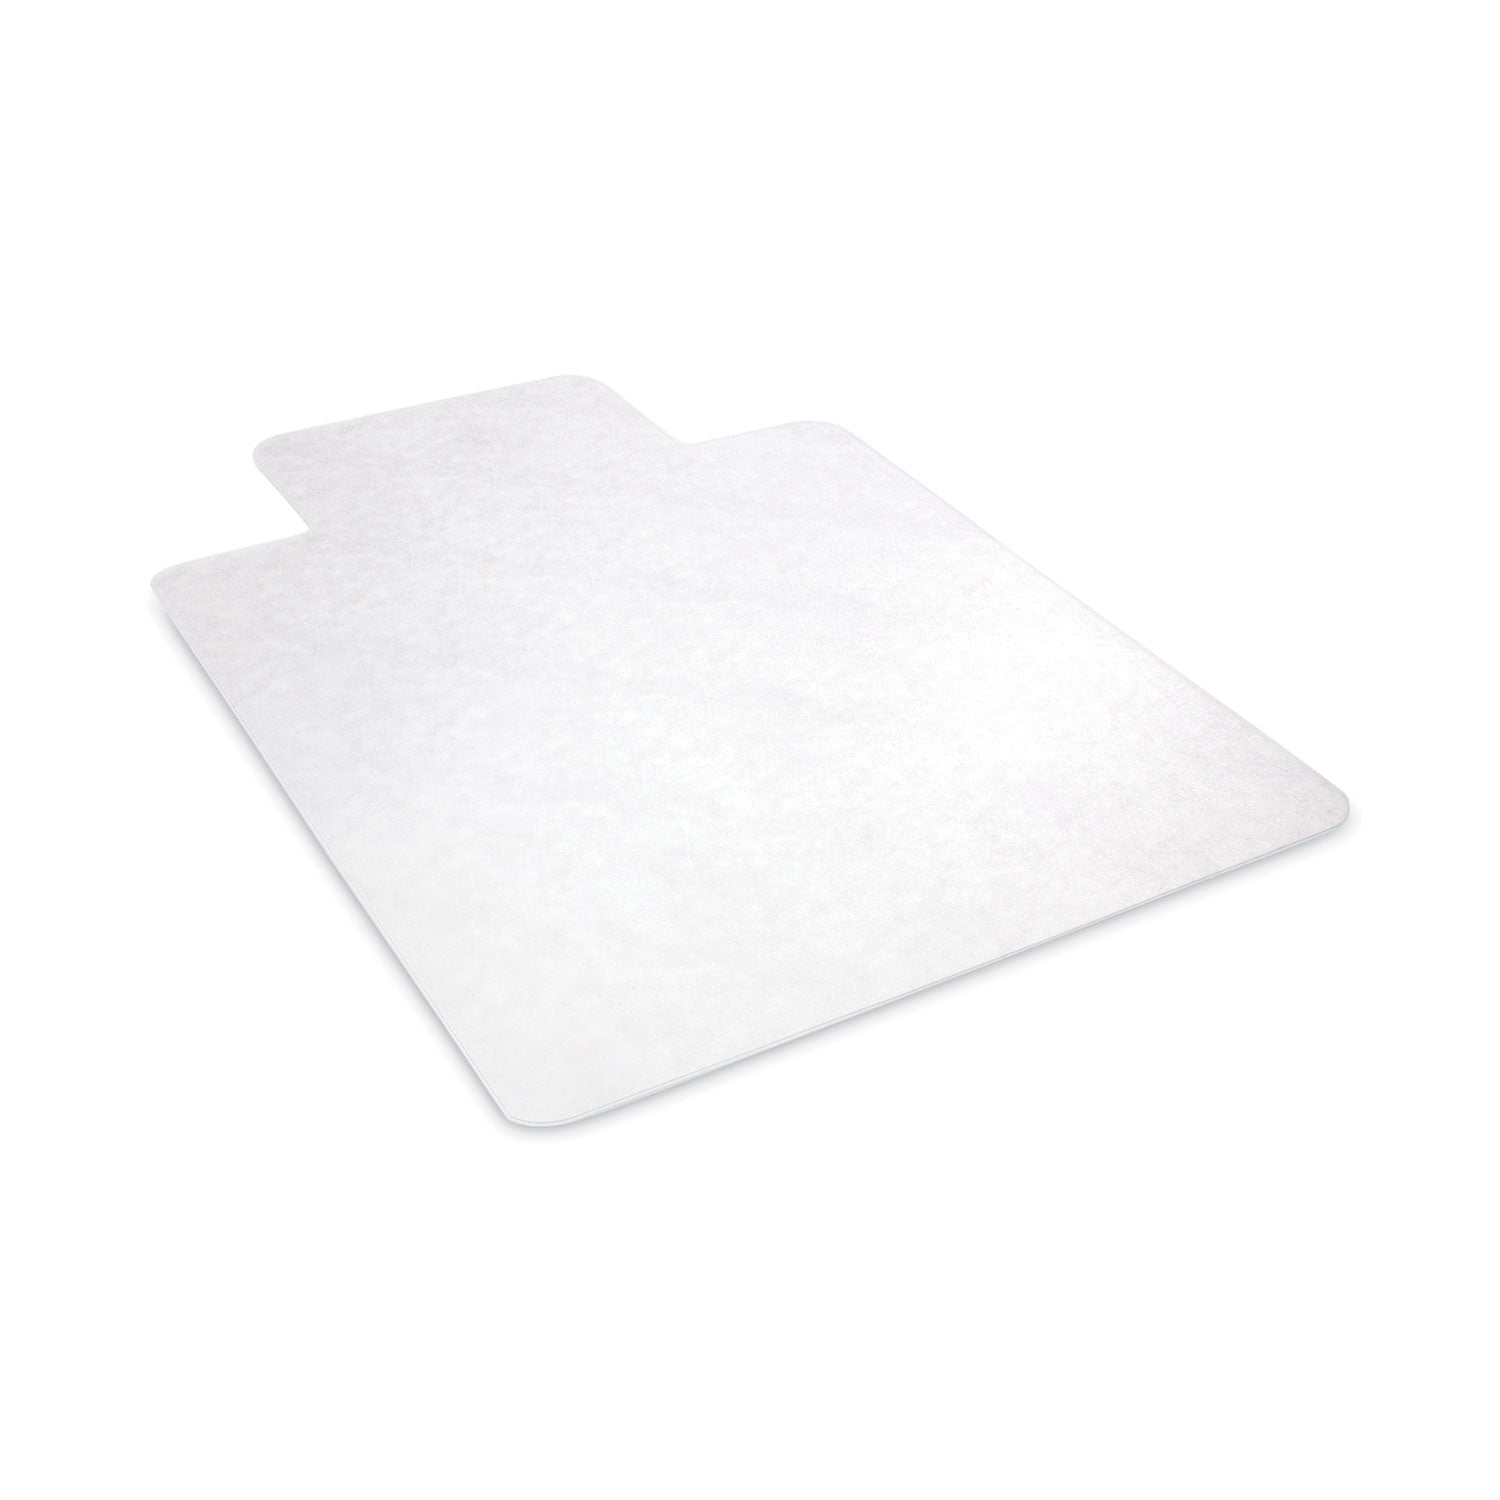 economat-all-day-use-chair-mat-for-hard-floors-flat-packed-46-x-60-lipped-clear_defcm2e432f - 5